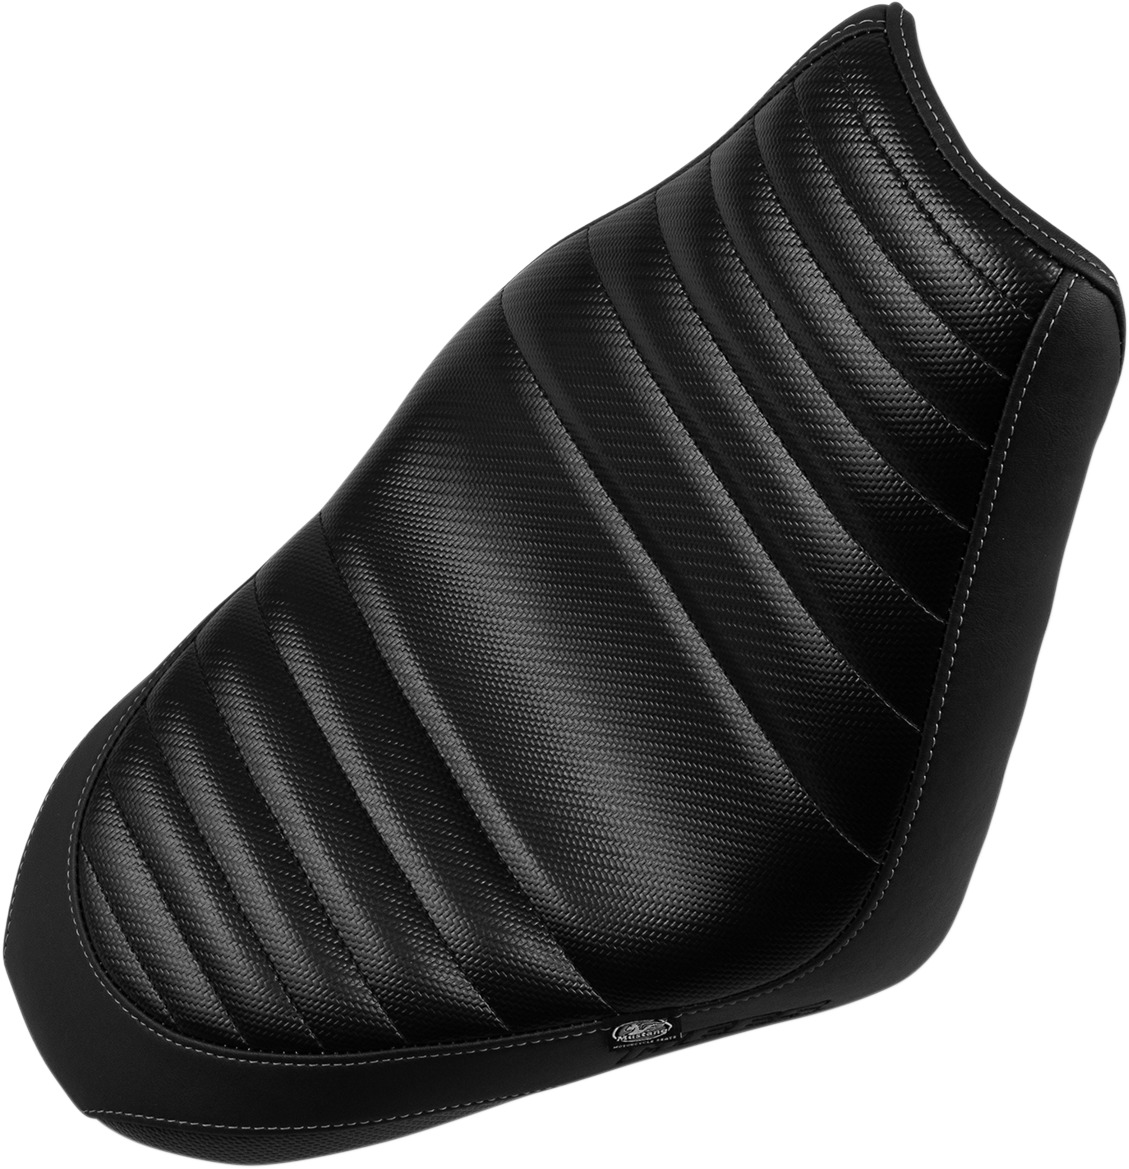 Signature Series Tuck and Roll Carbon Fiber Solo Seat Low&Back - For 15-21 Indian Scout - Click Image to Close